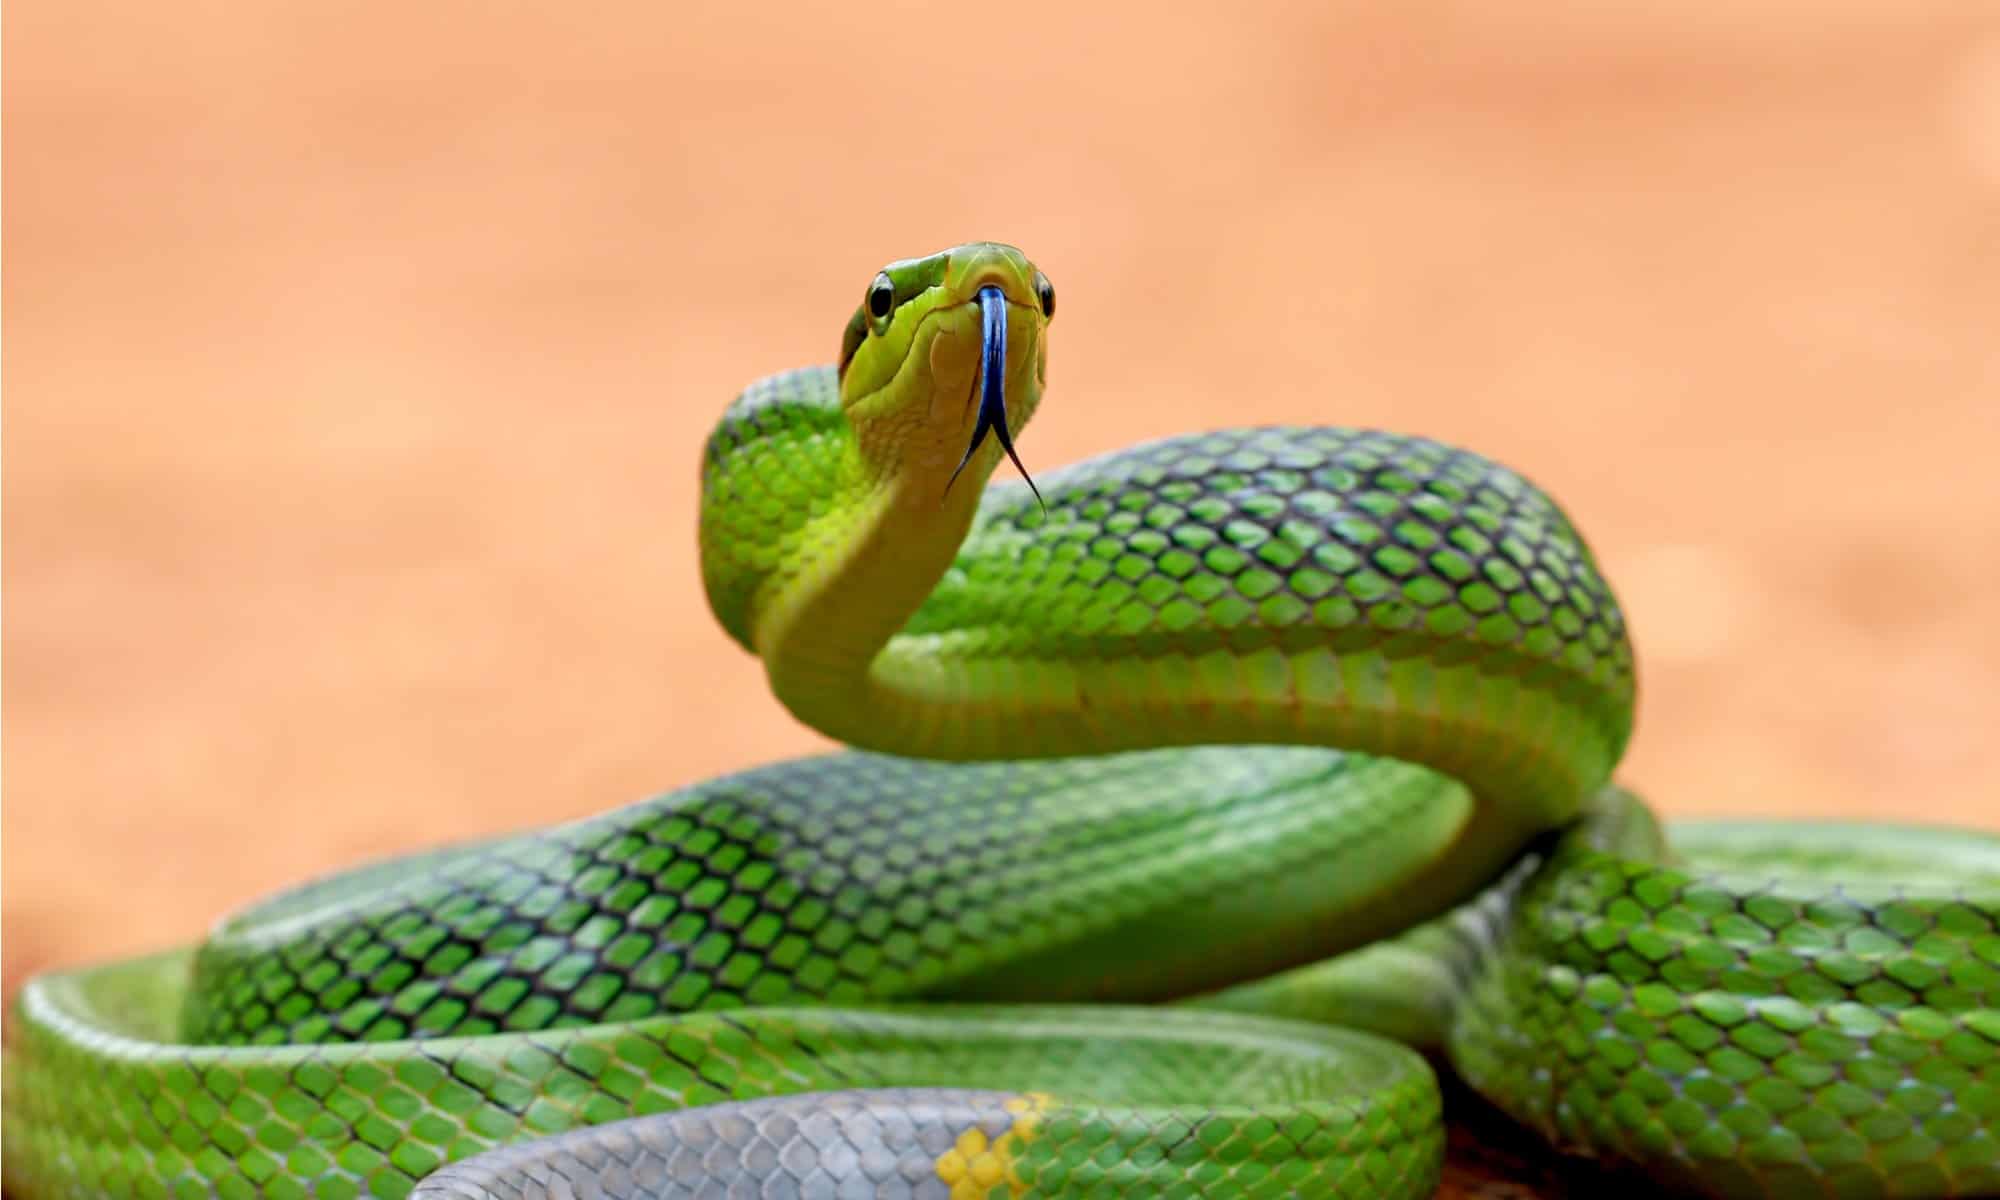 10 Endangered Snakes We Should Act to Save - AZ Animals